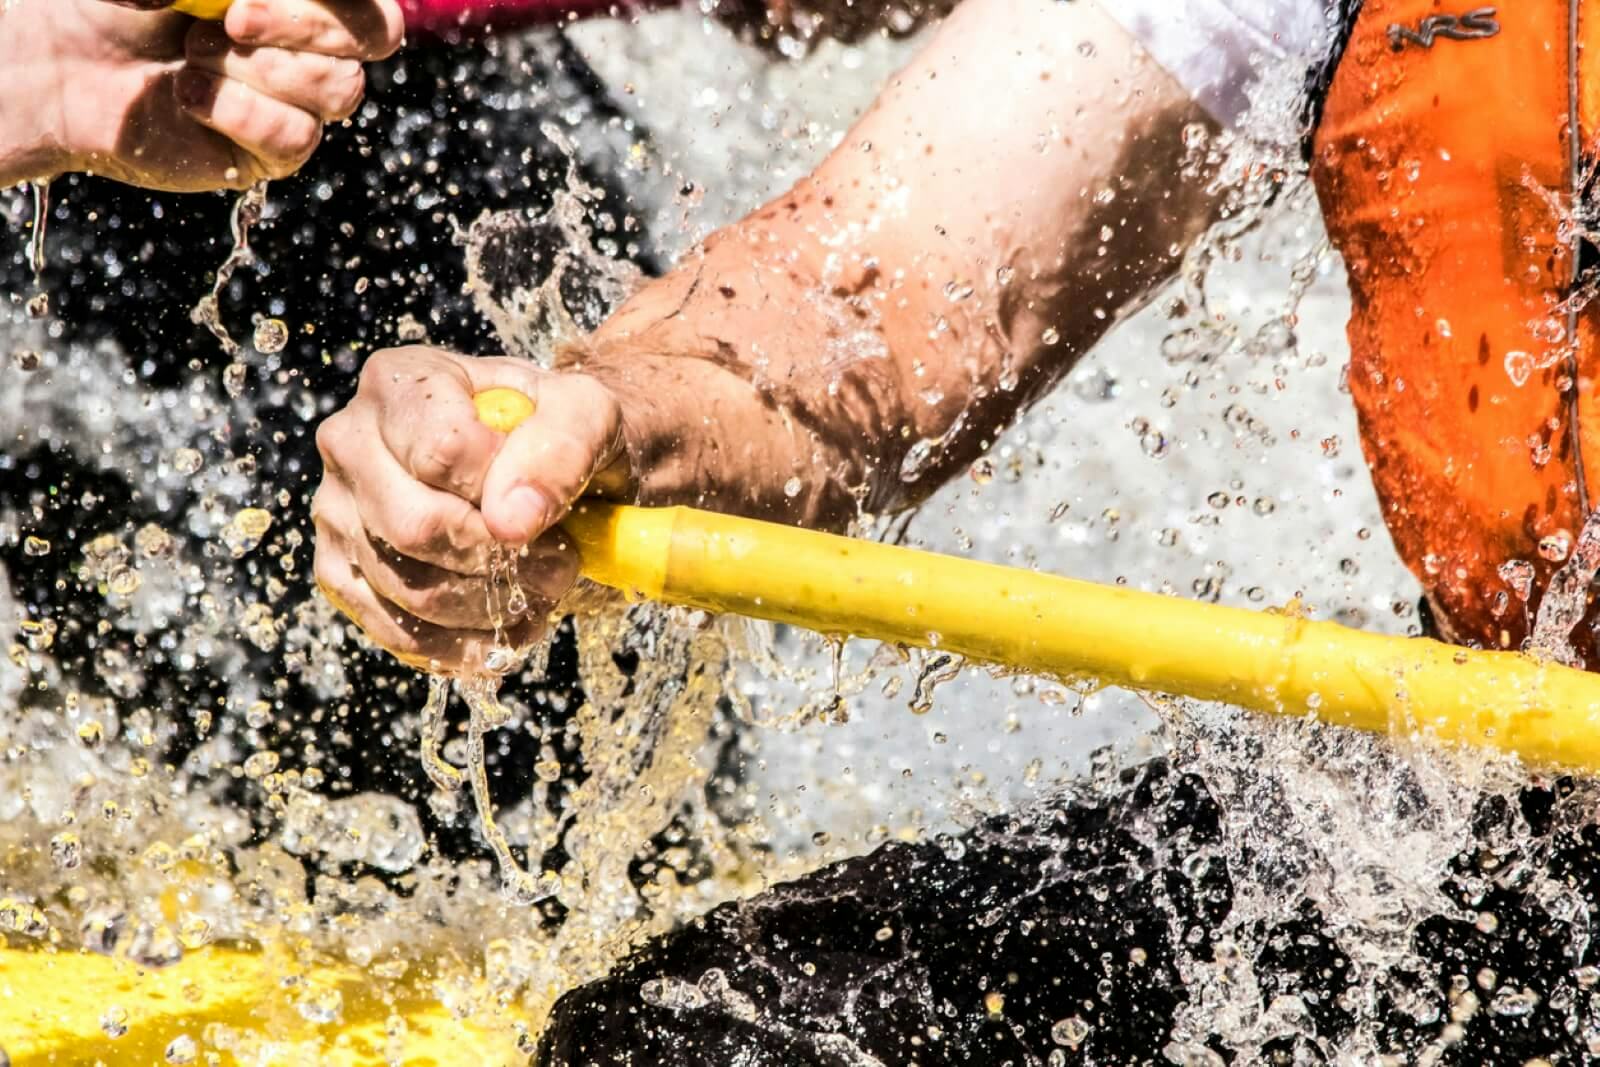 A close-up of a man's hand holding a rafting paddle